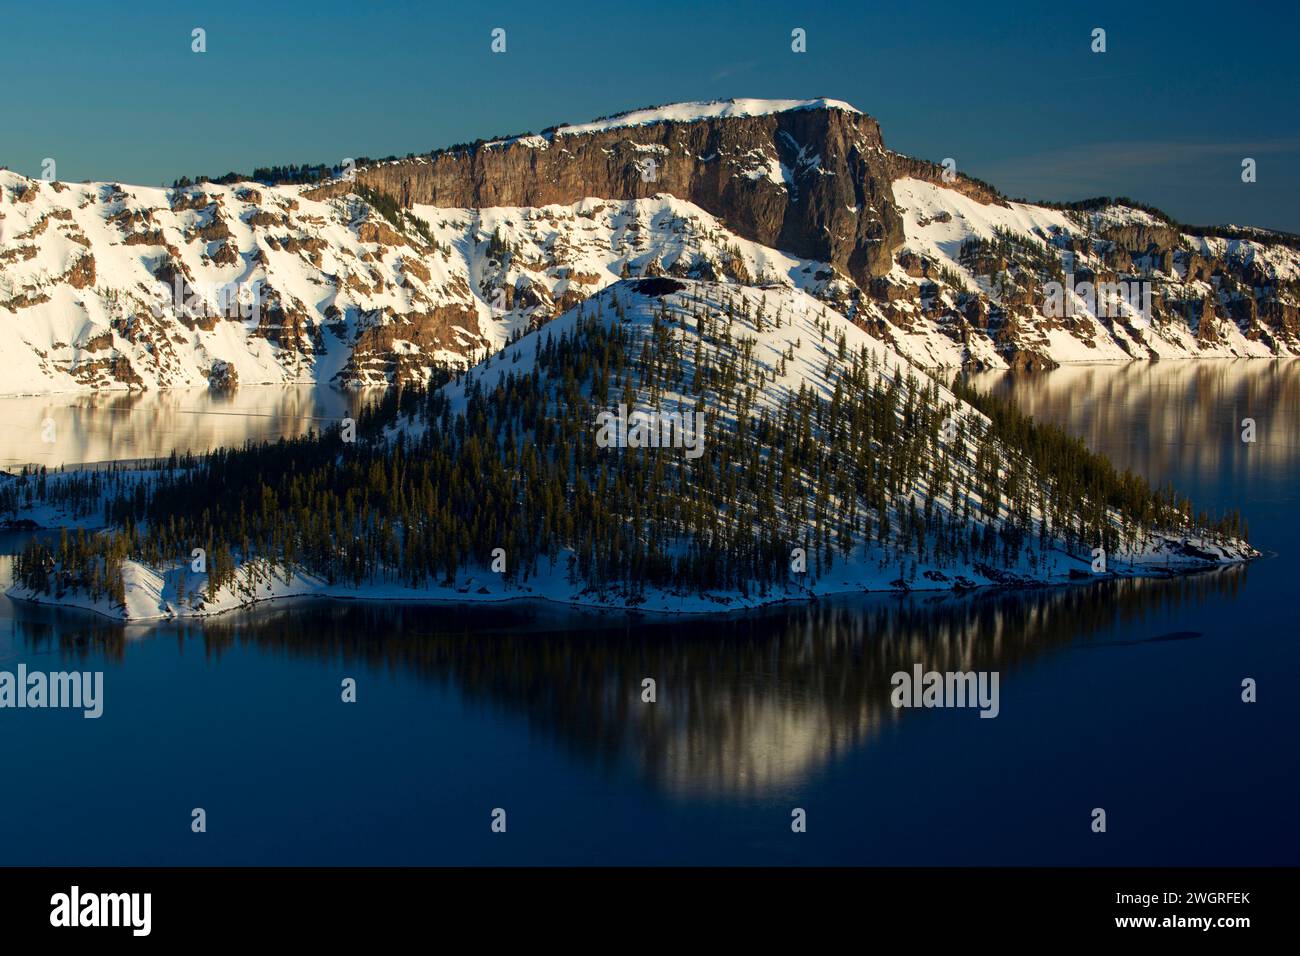 Wizard Island with Llao Rock, Crater Lake National Park, Oregon Stock Photo